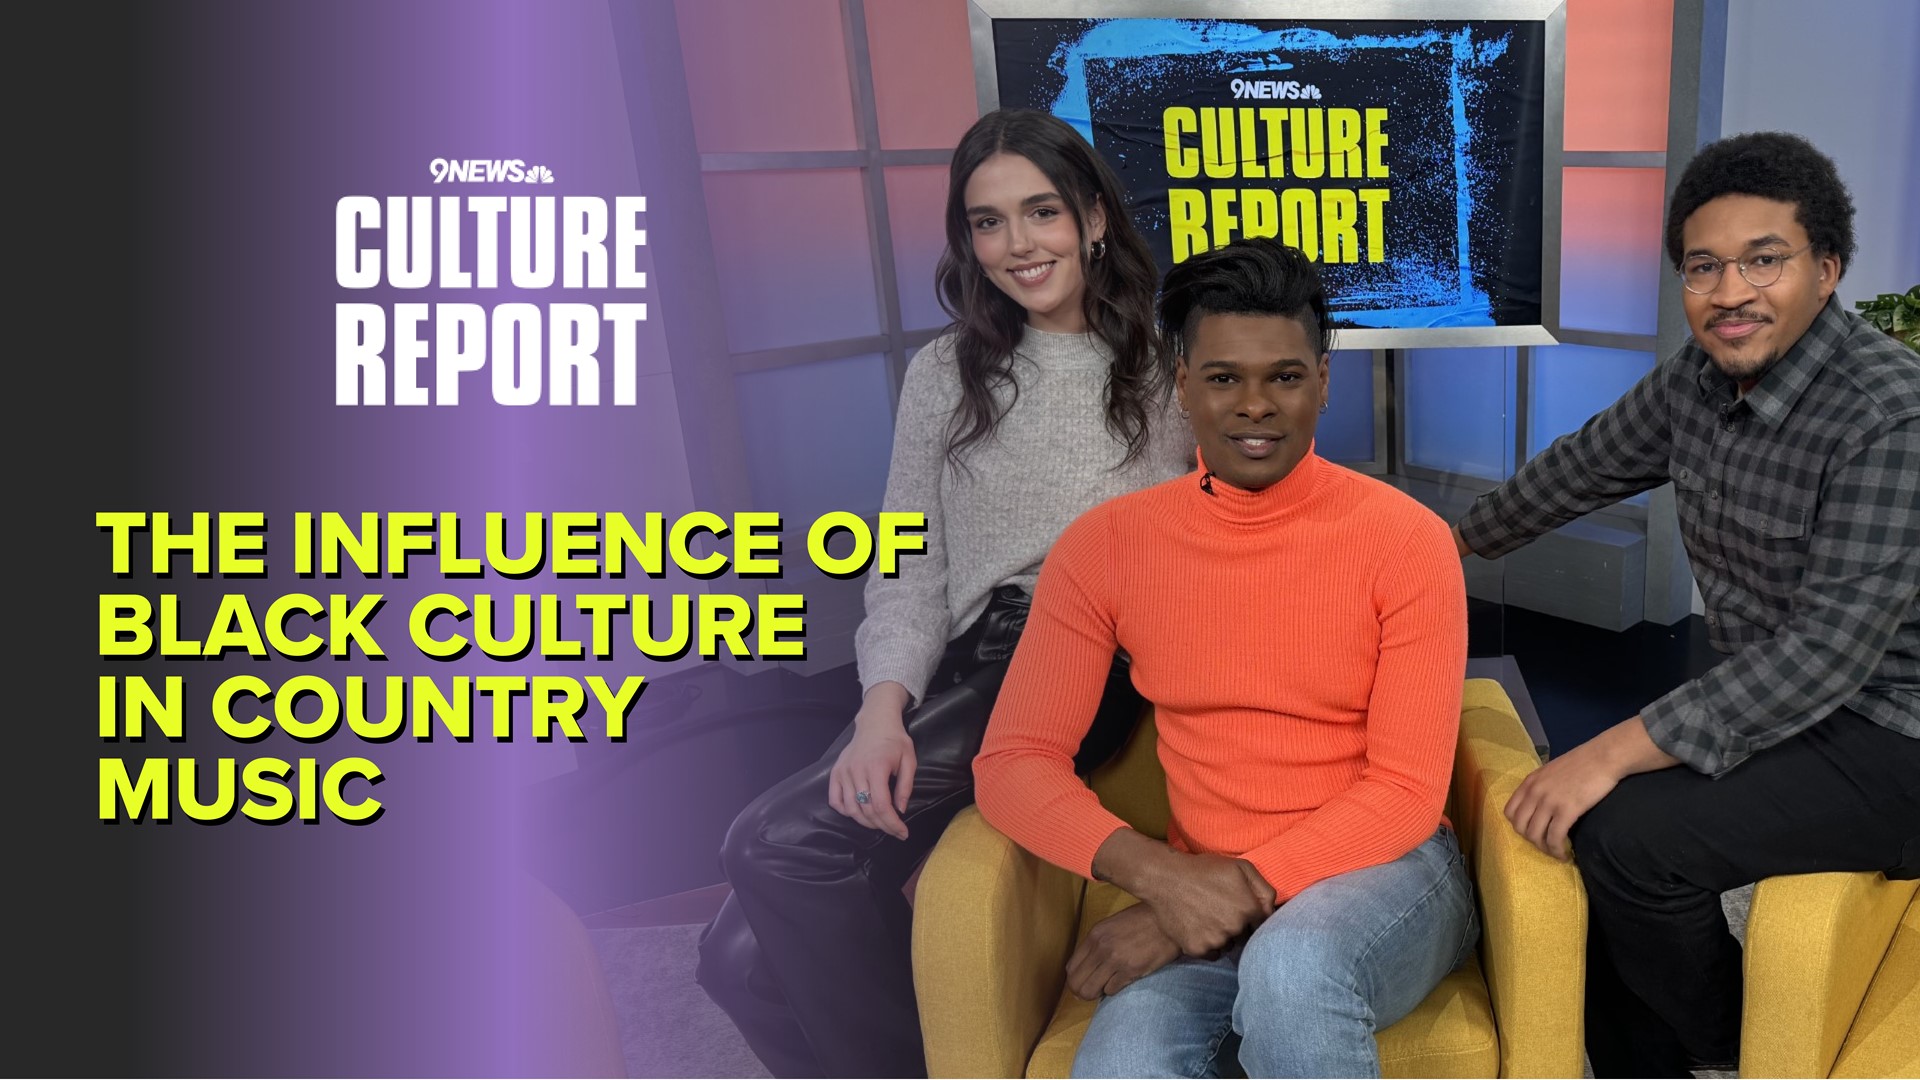 This week we discuss Beyoncé's new music & why its caused so much discourse in Country music, Usher's Super Bowl performance, & Black vs African-American identifiers